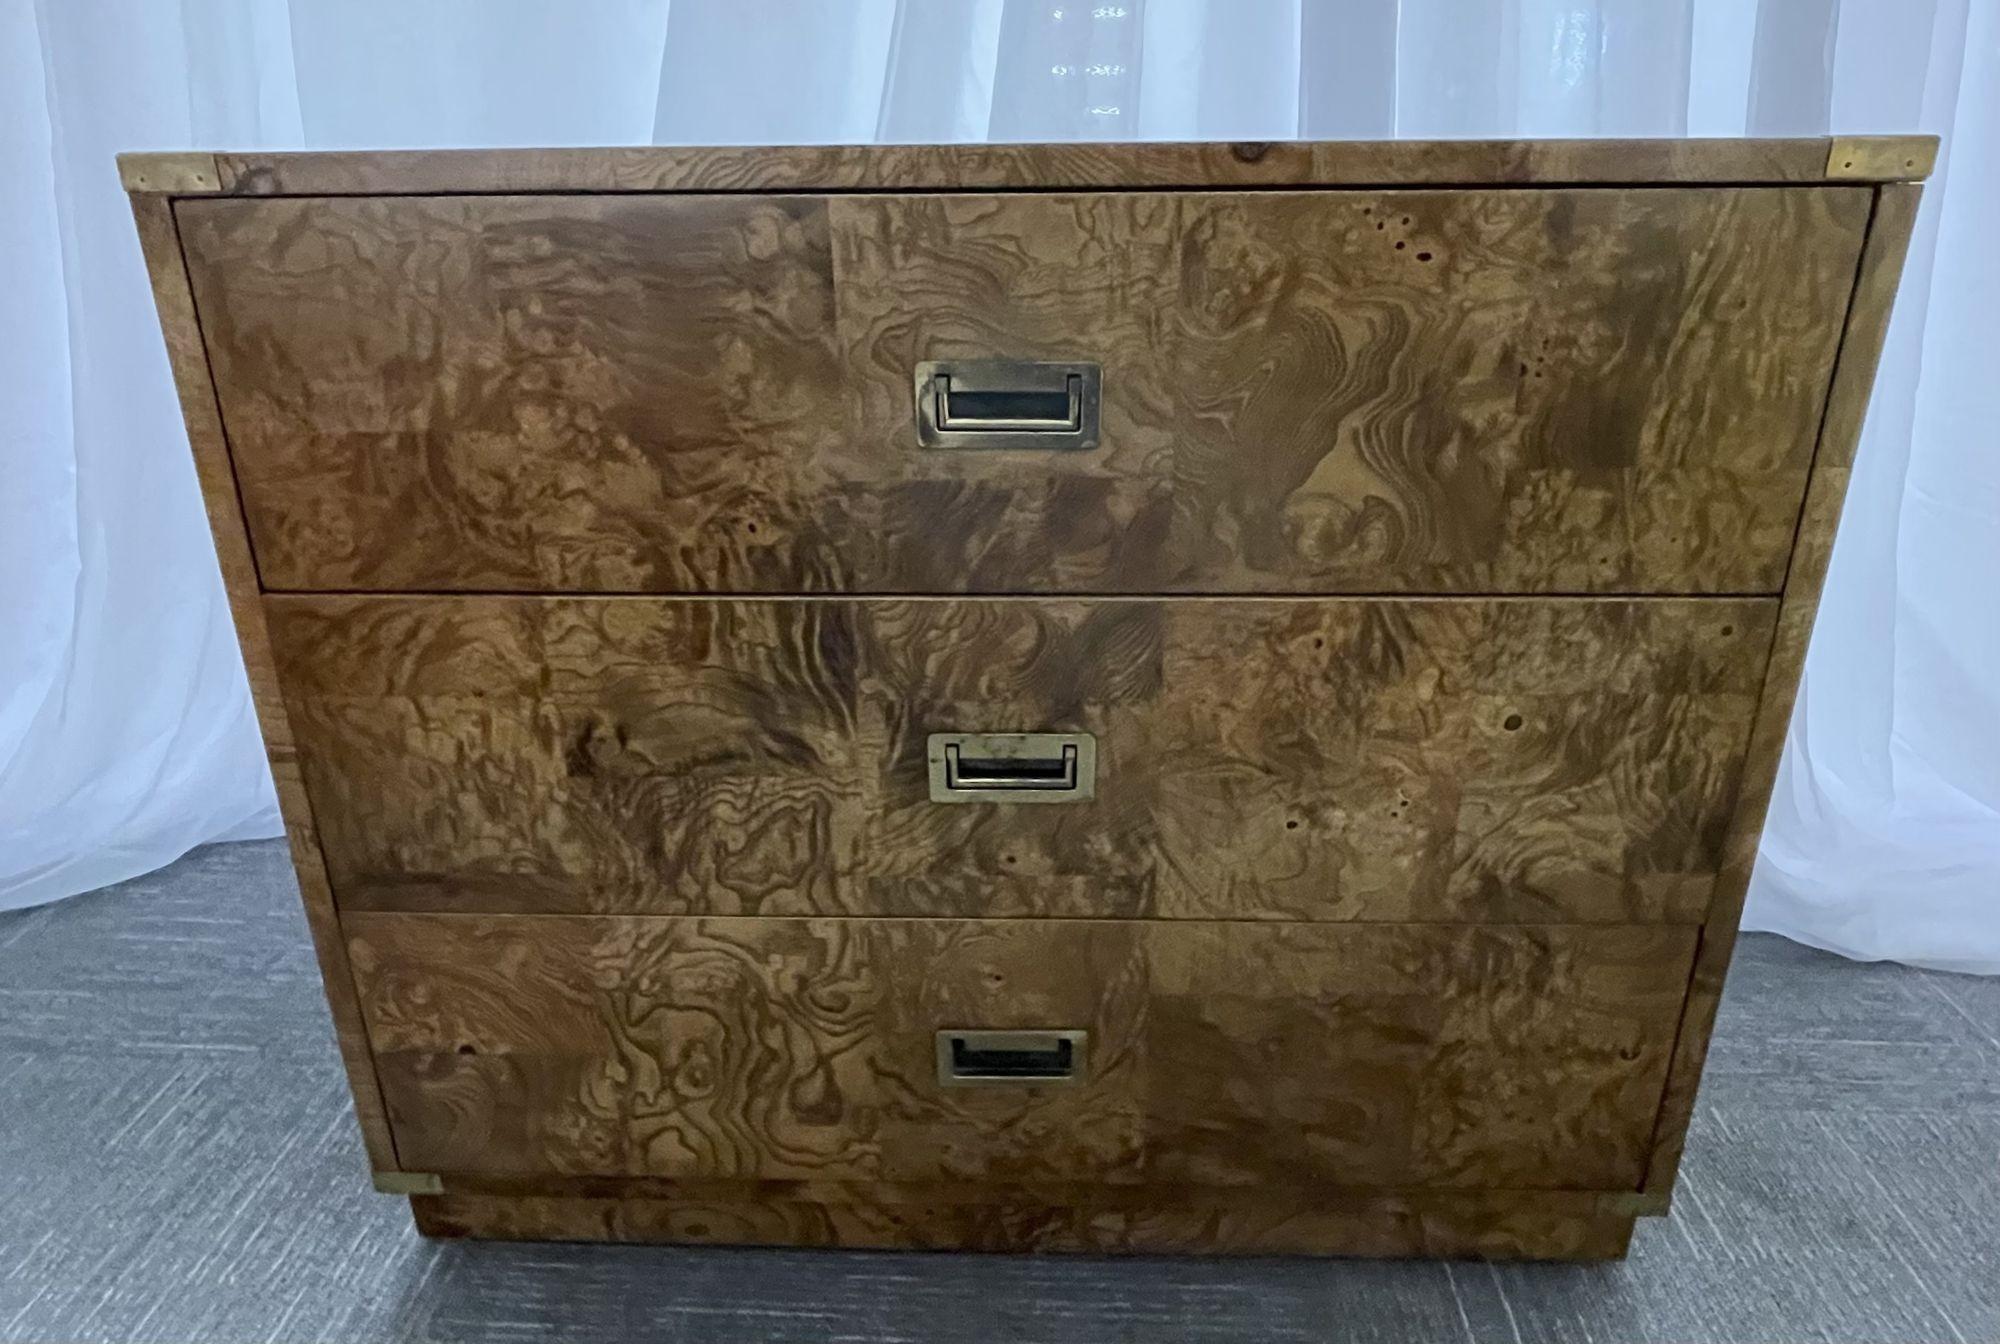 A Burlwood campaign chest, nightstand or end table.
 
Burlwood campaign chest with three drawers and elegant brass hideaway pulls by Bernhardt; fully refinished.